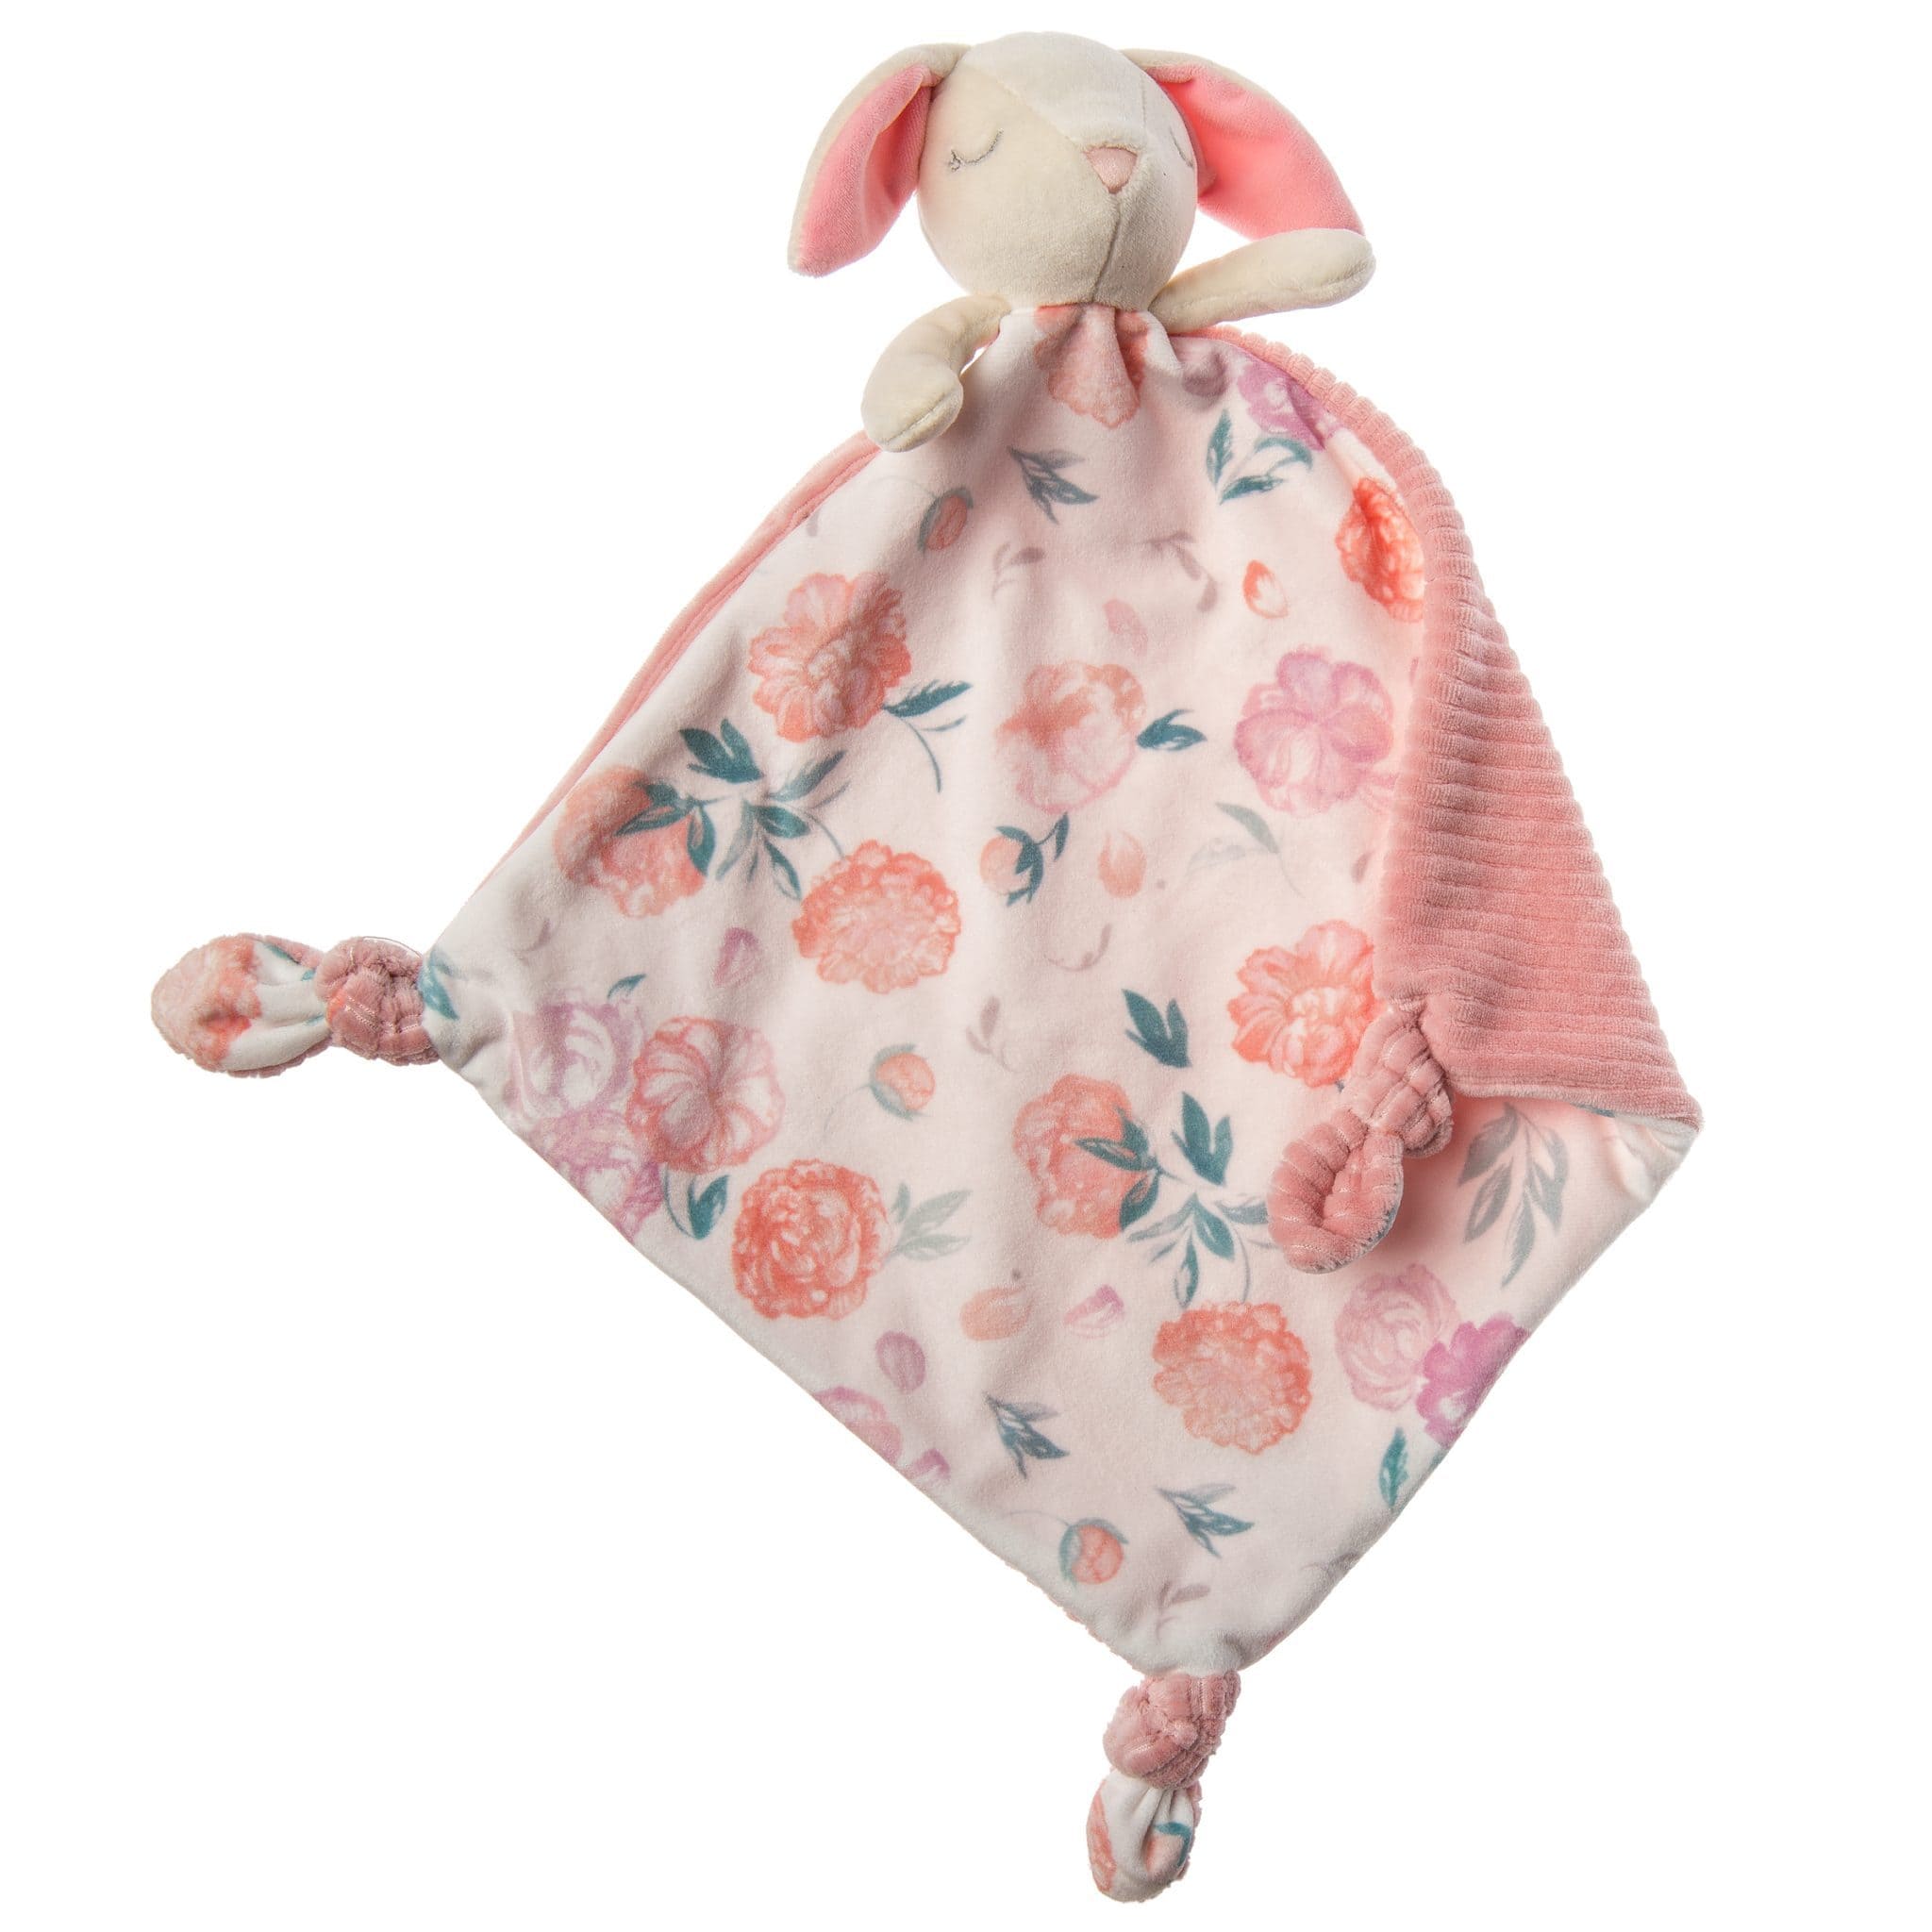 Little Knottie Bunny Comforter by Mary Meyer - Bumbles & Boo